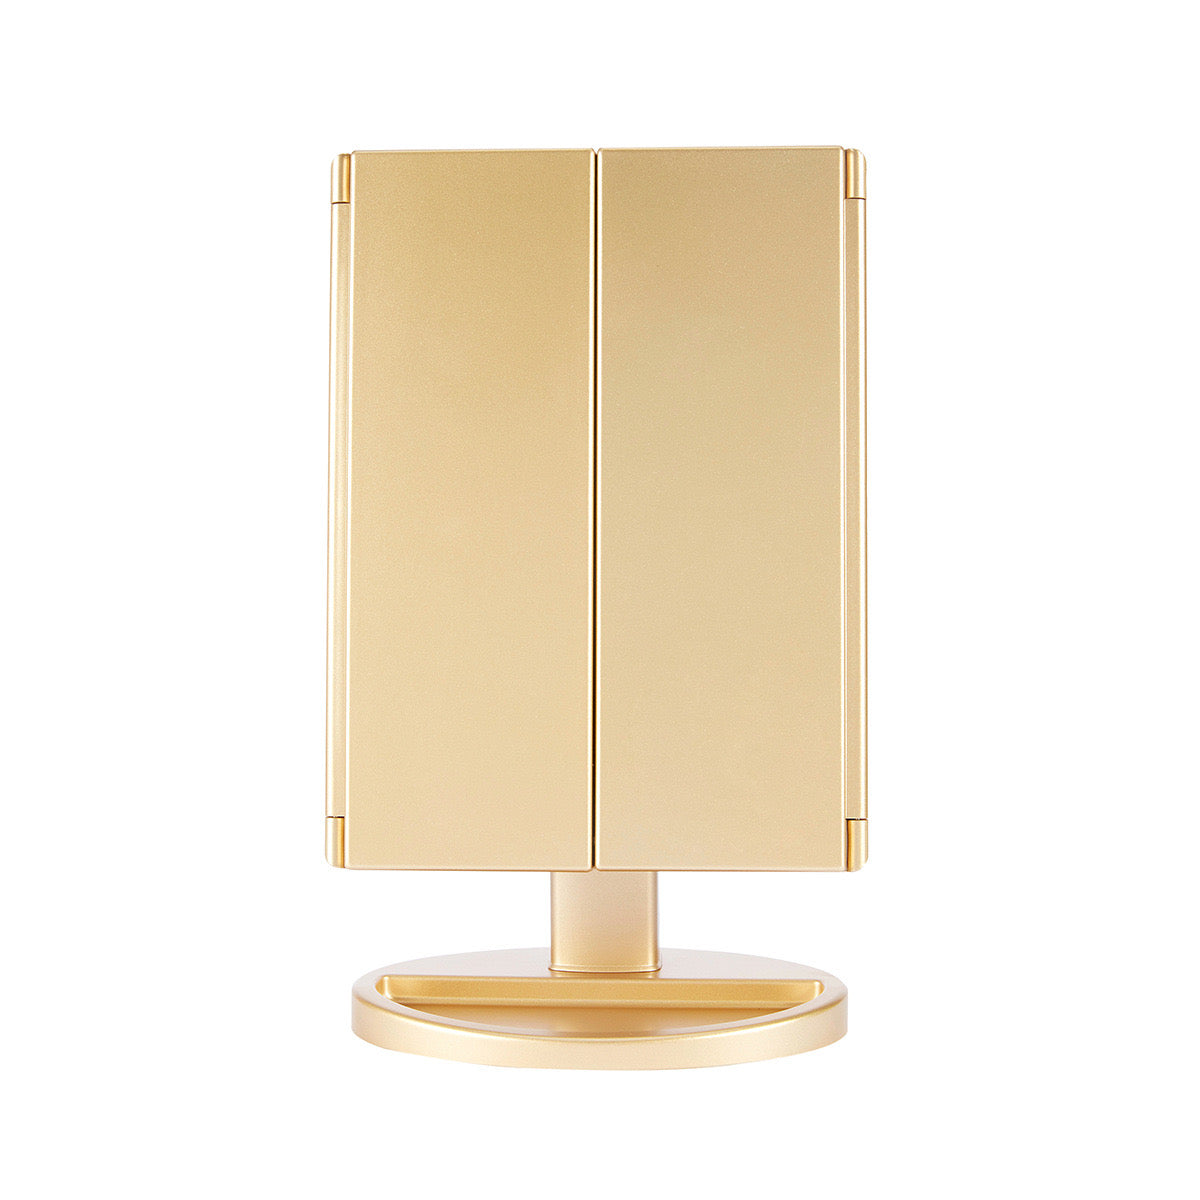  Tri-fold Makeup Mirror with LED Lights, with a gold color